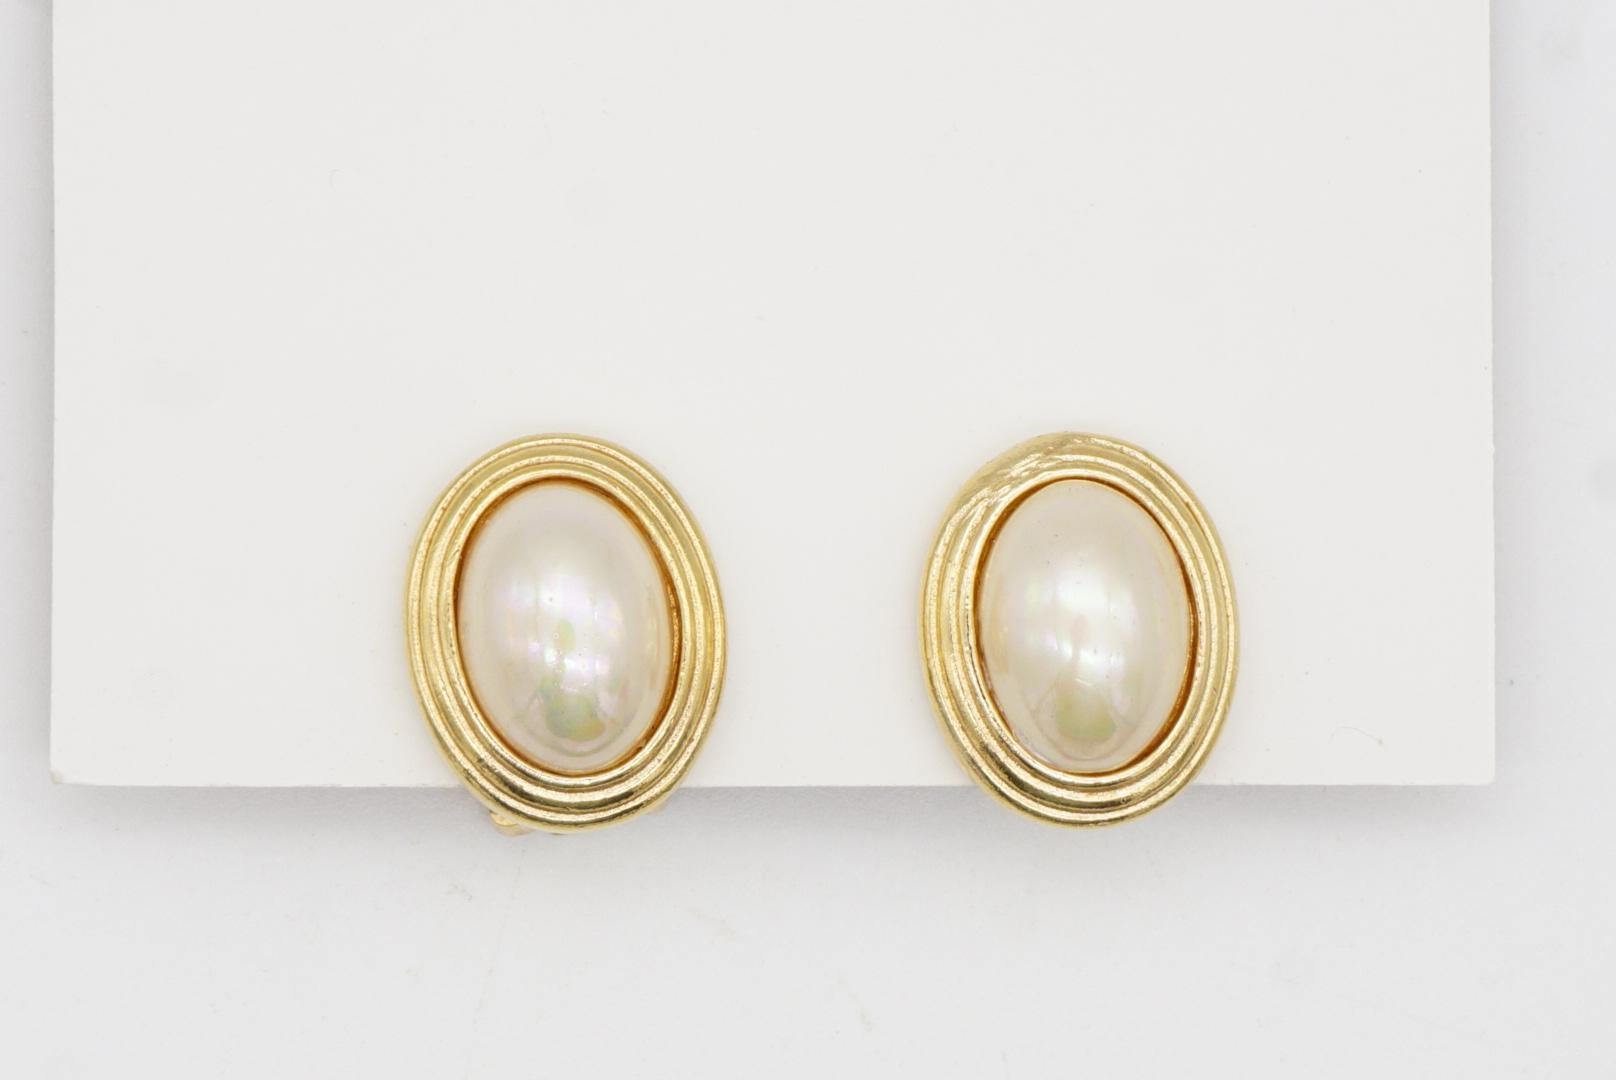 Christian Dior Vintage 1980s Oval Large White Pearl Retro Elegant Clip Earrings For Sale 3